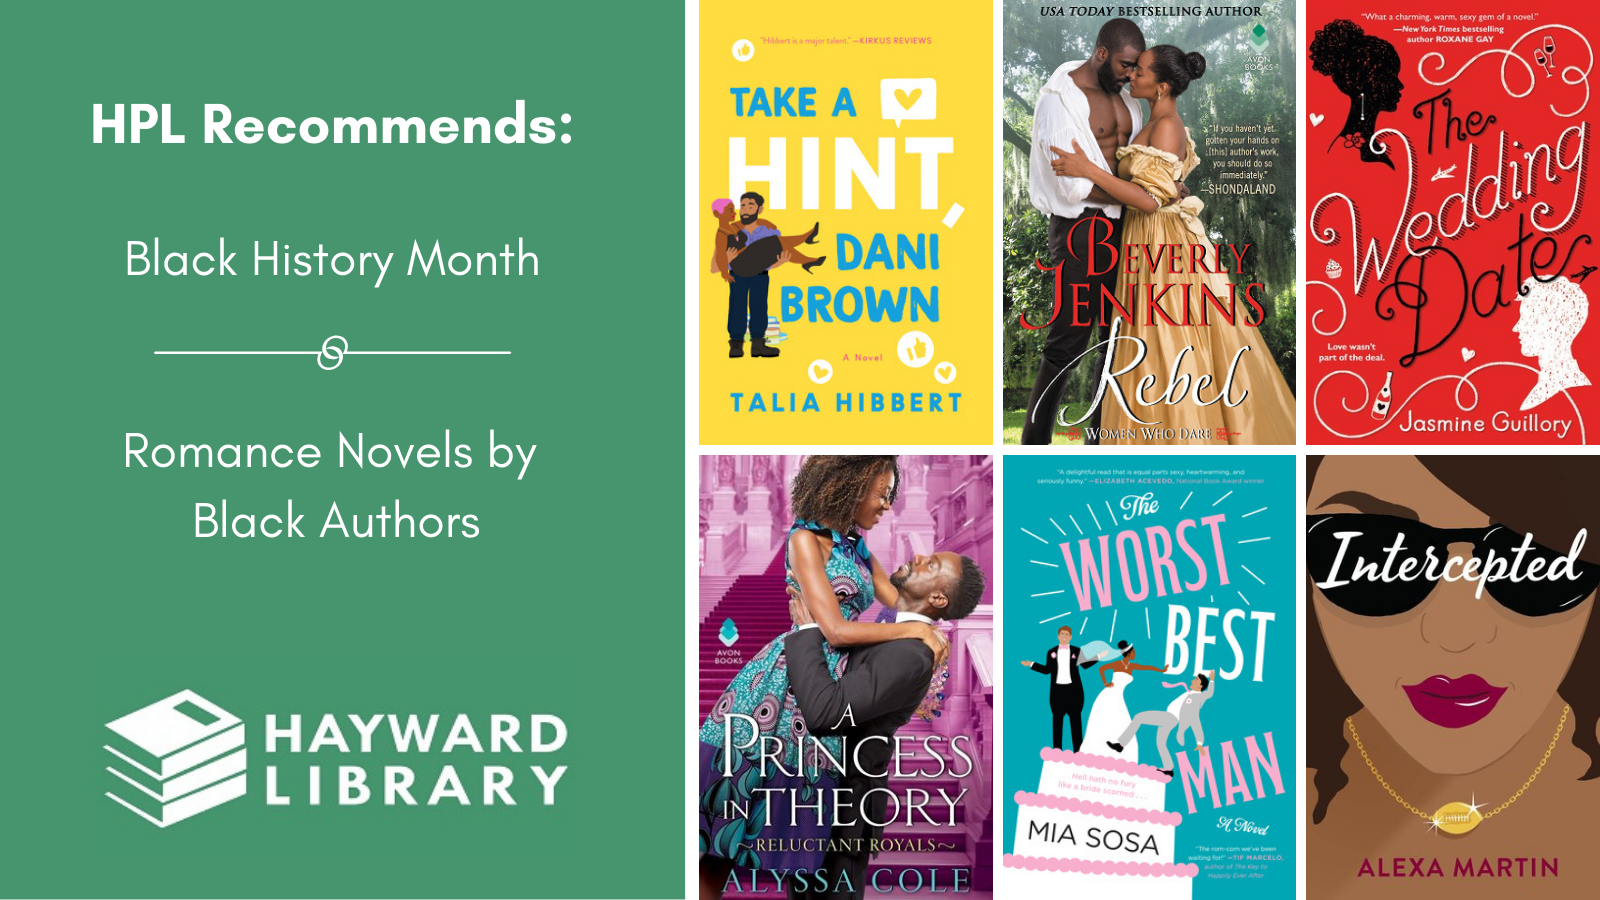 Collage of book covers with a green block on left side that says HPL Recommends, Black History Month, Romance Novels by Black Authors in white text, with Hayward Library logo below it.